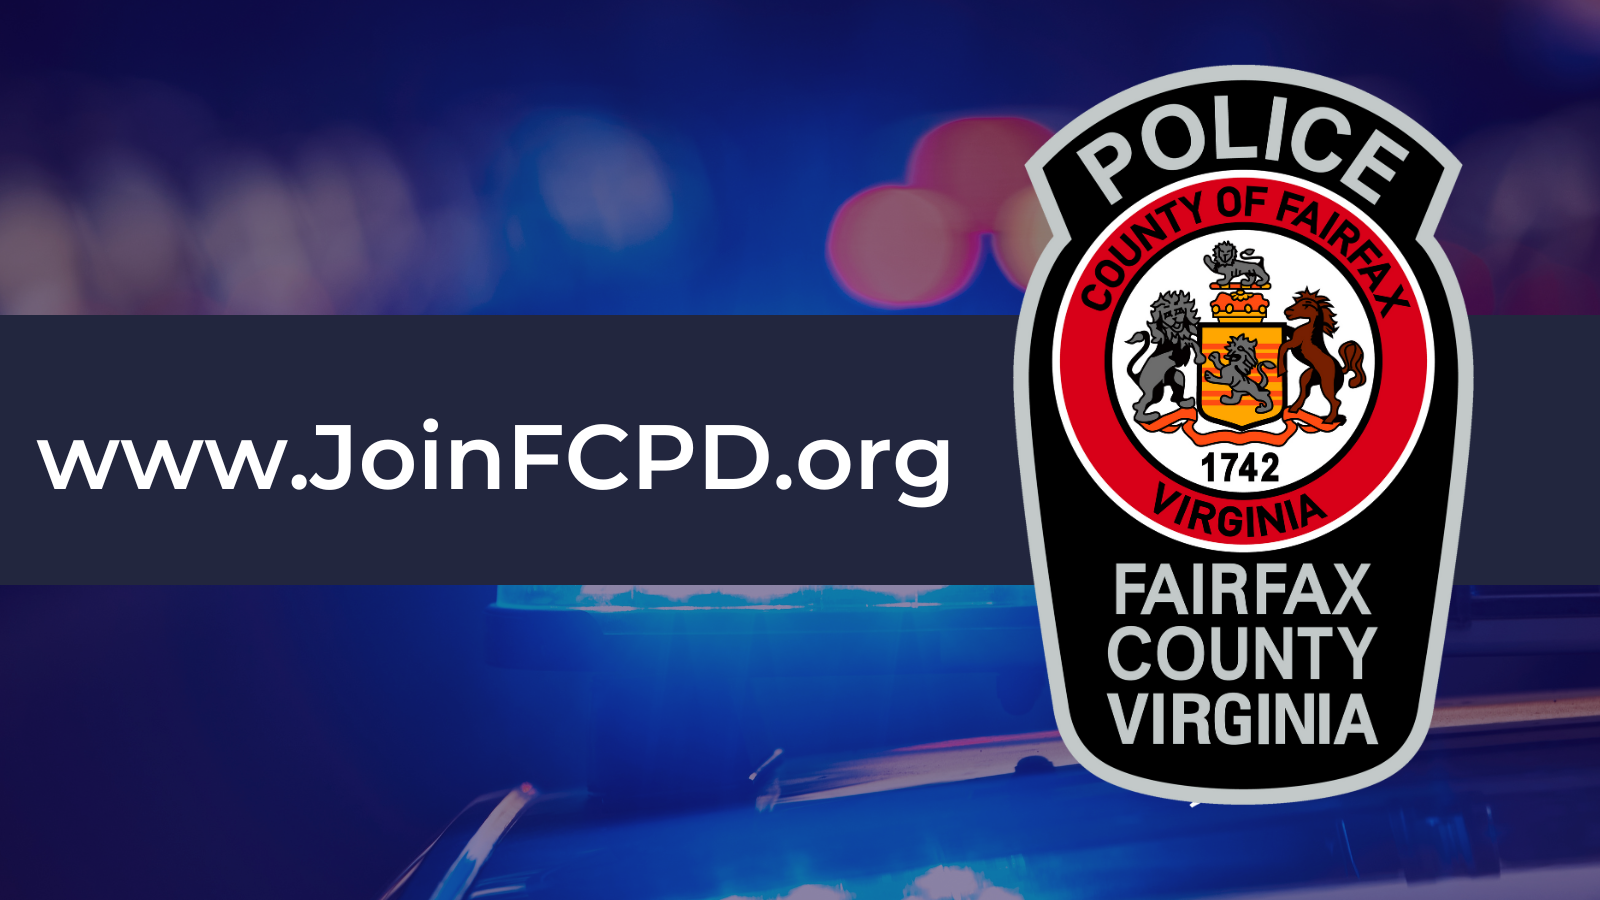 Get Involved This Weeks Community Events at FCPD Fairfax County Police Department News